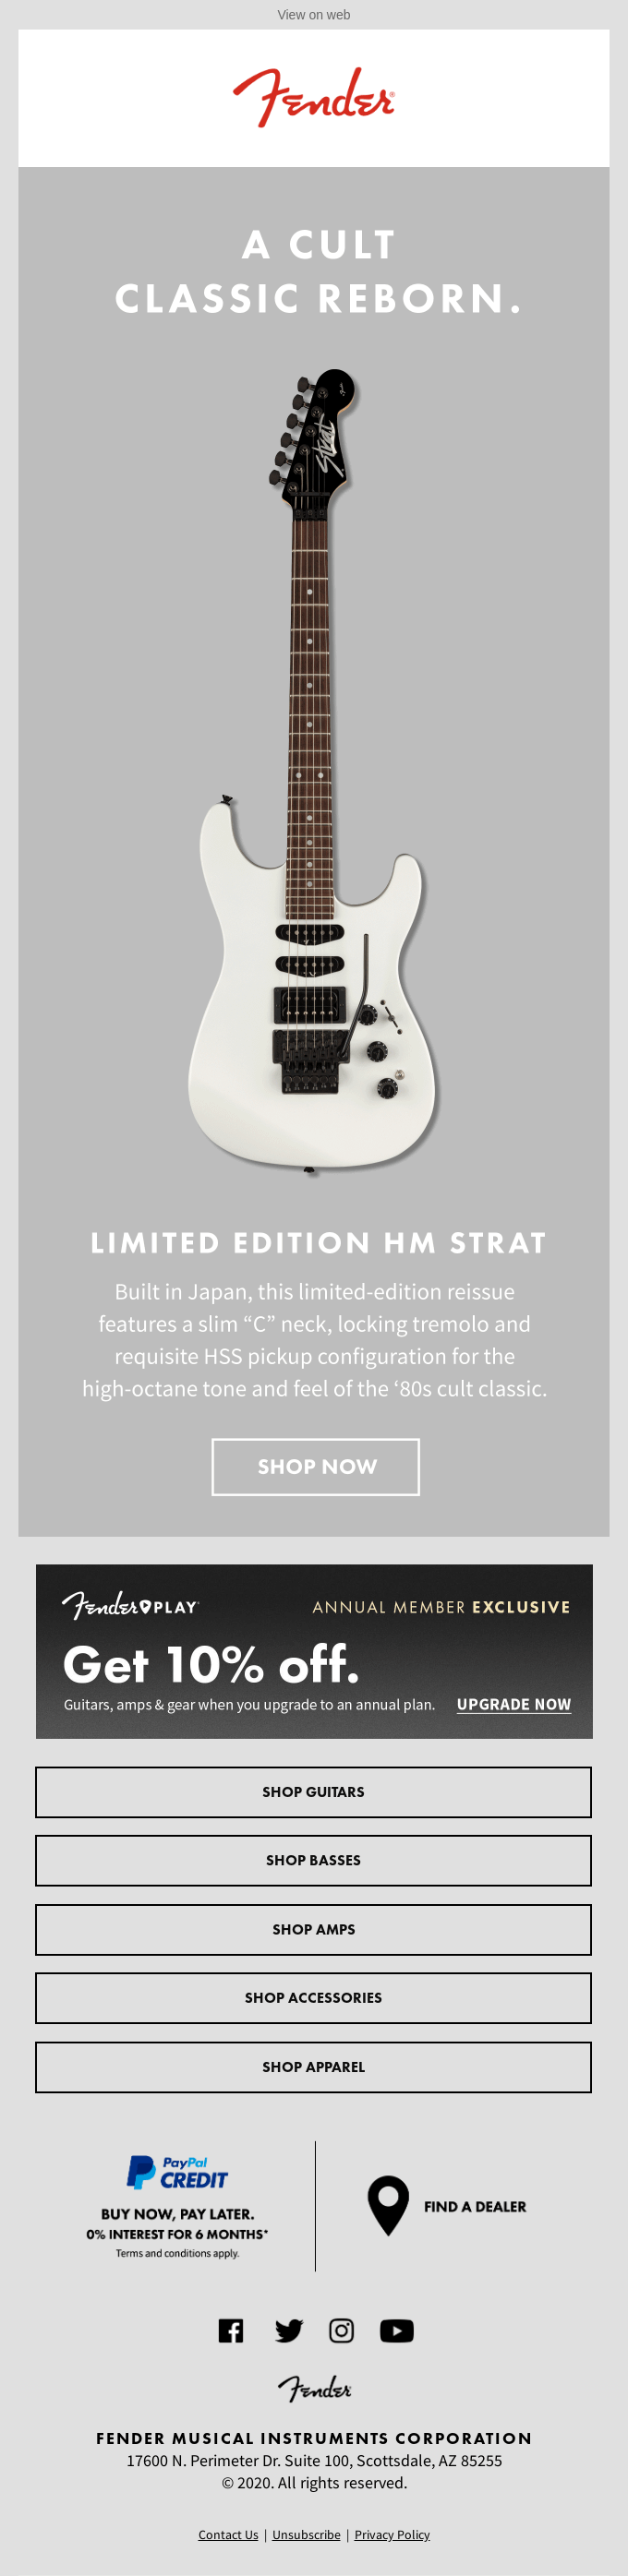 Limited Edition HM Strat